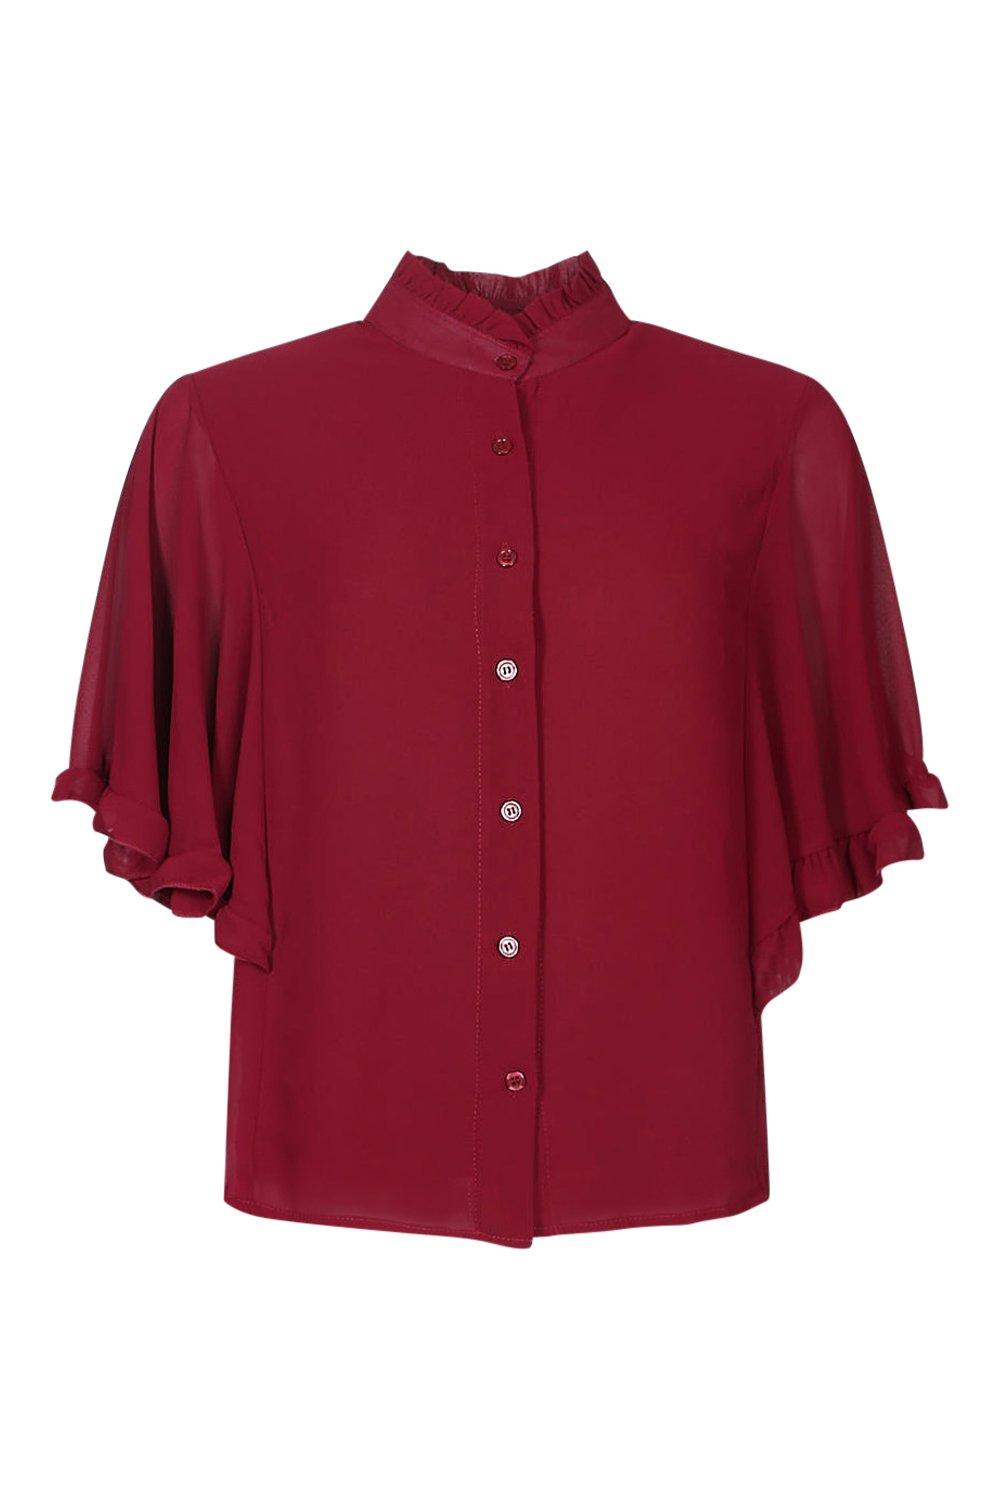 The Solid Collared Puff Sleeve Satin Blouse